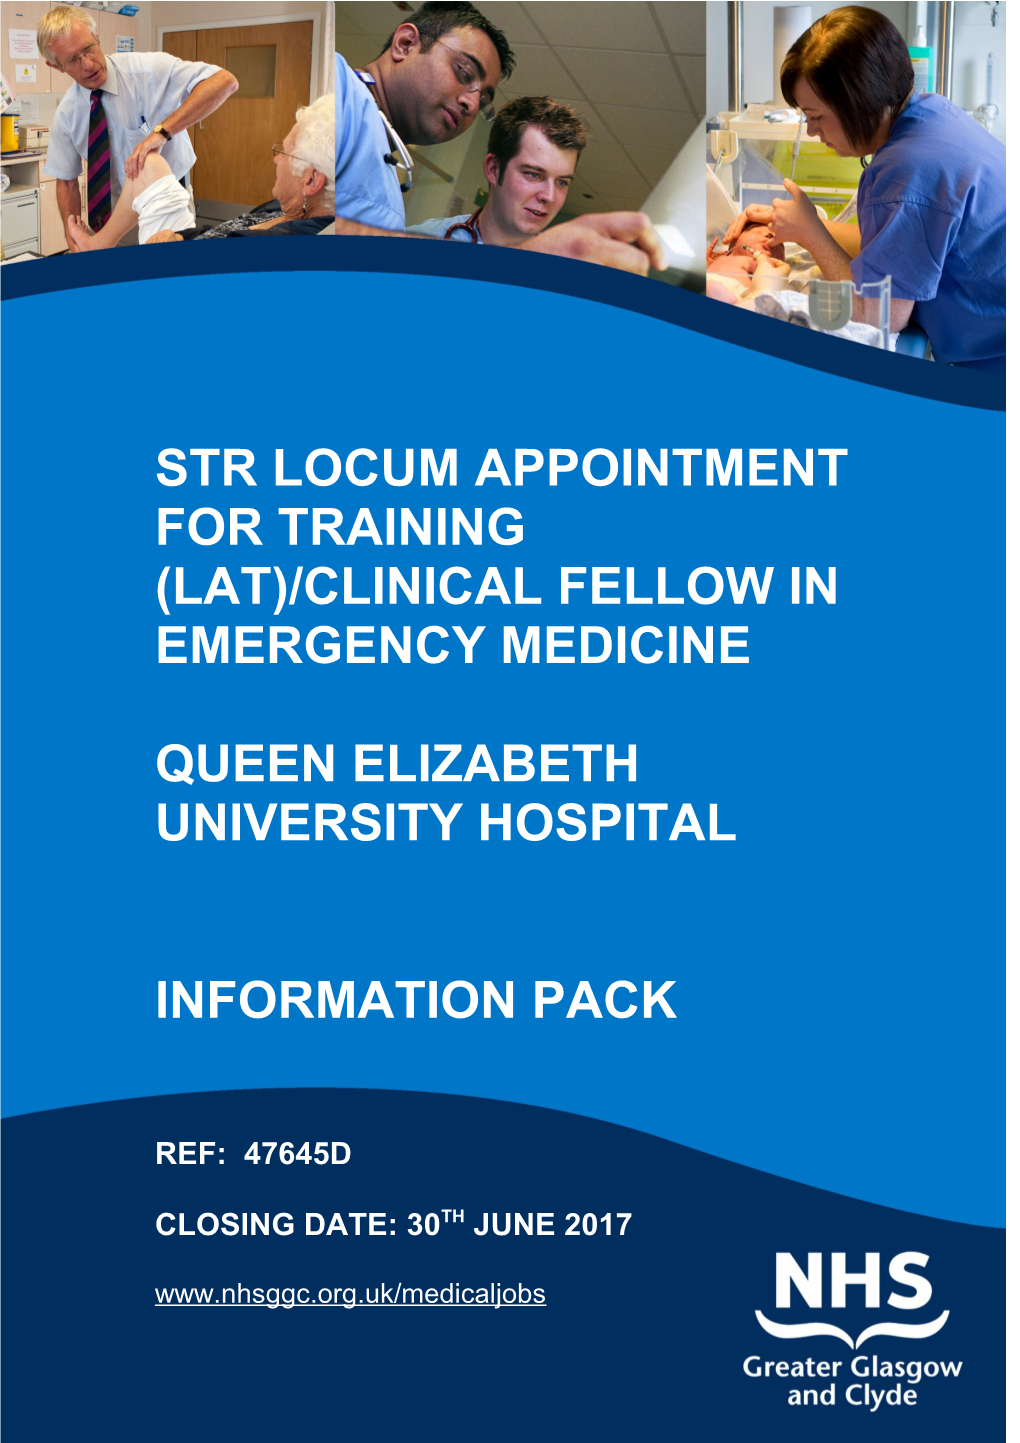 Str LOCUM APPOINTMENT for TRAINING (Lat)/CLINICAL FELLOW in Emergency Medicine